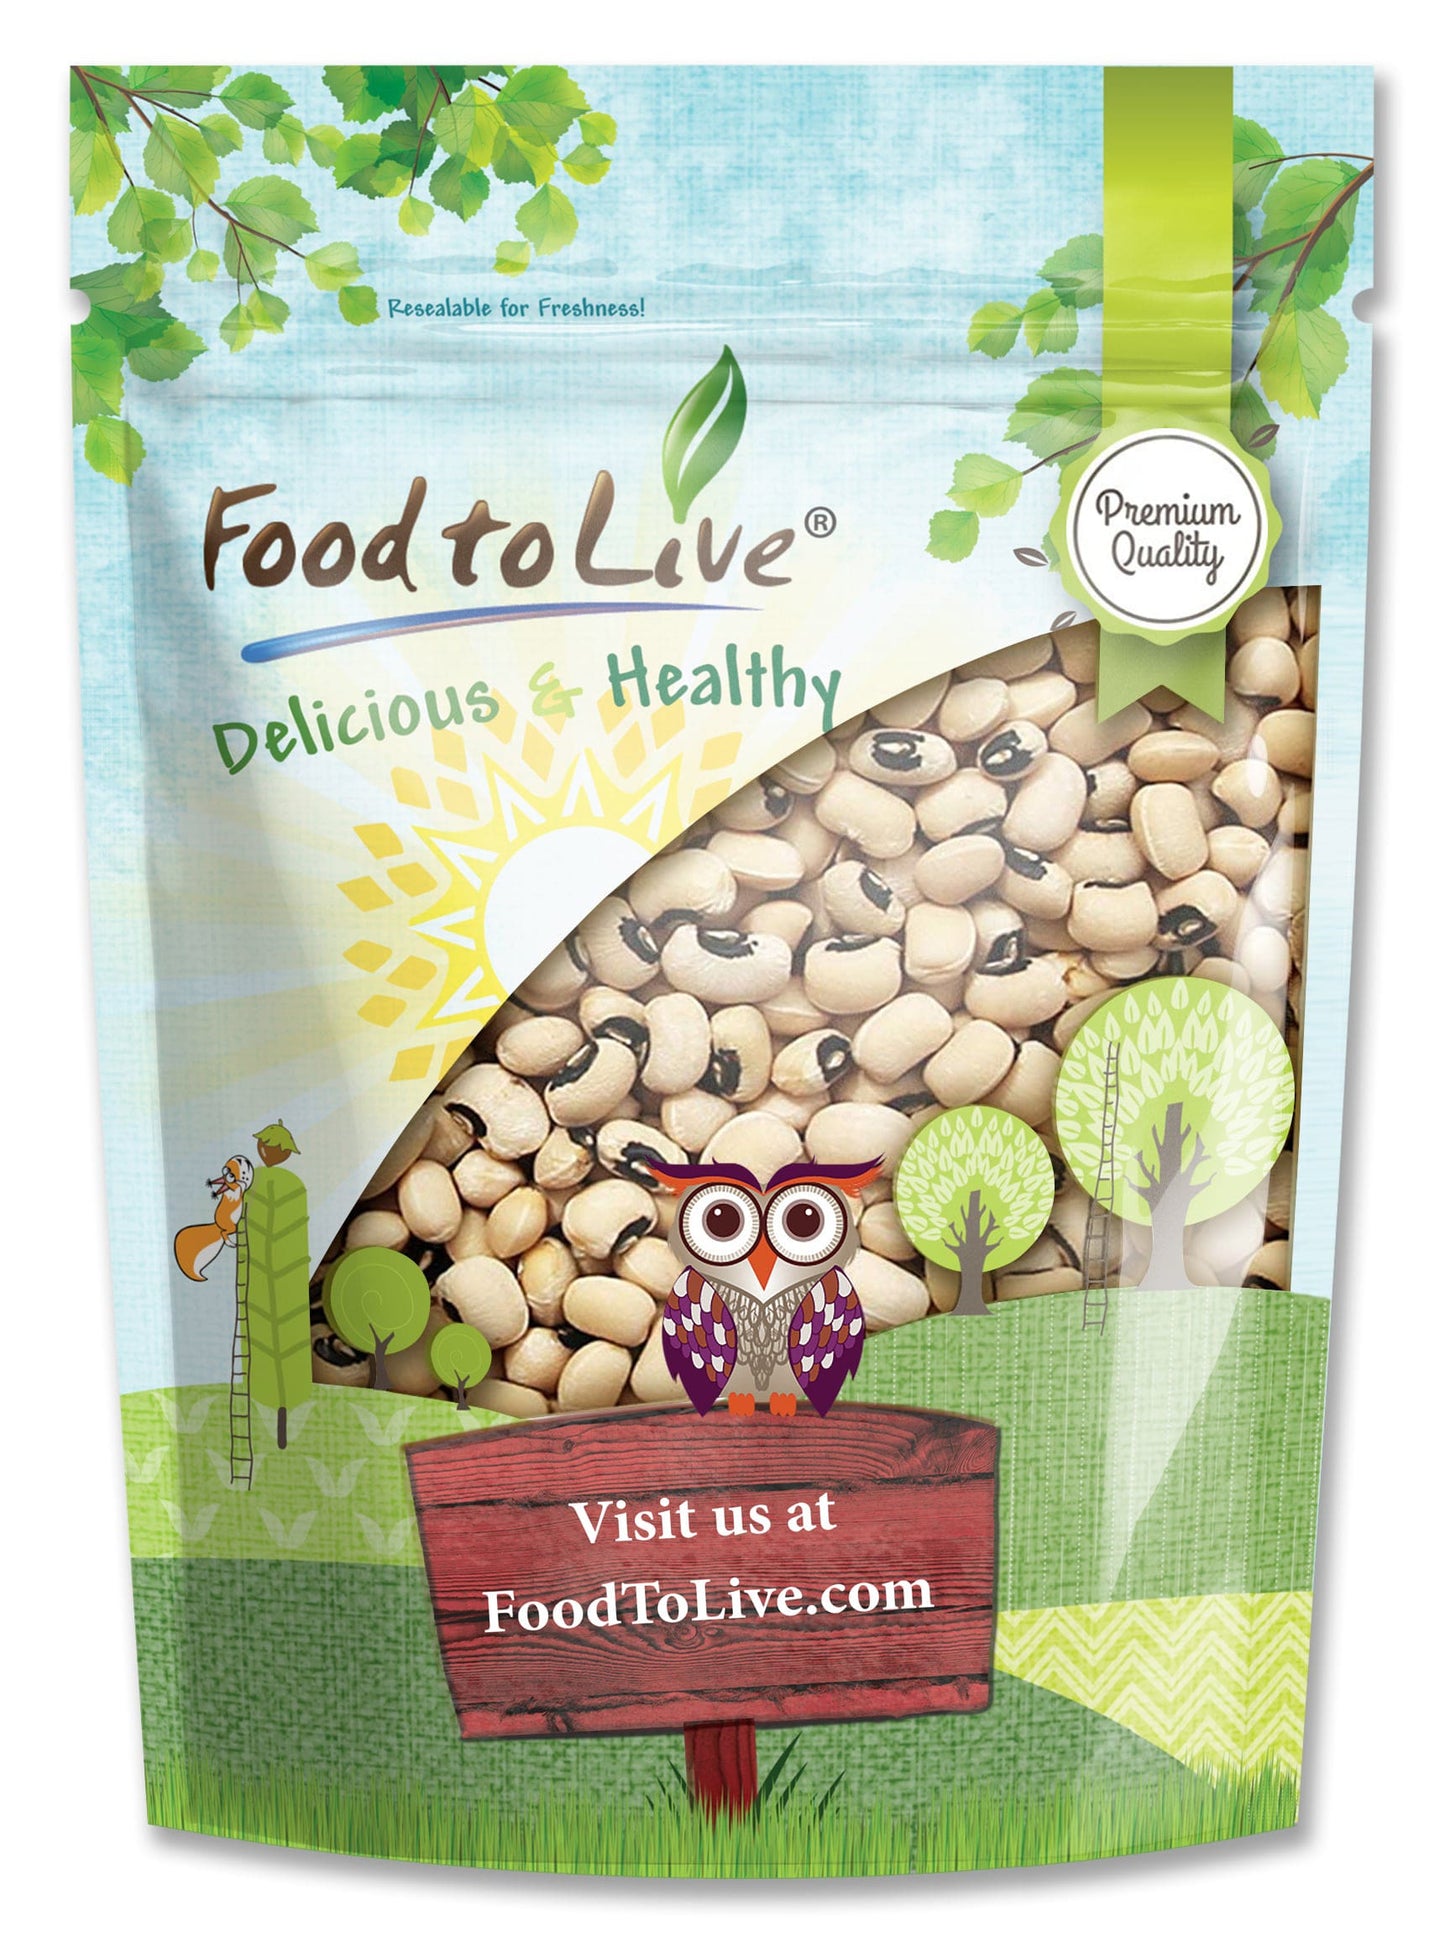 Black-Eyed Peas — Non-GMO Verified, Raw Dried Whole Cow Peas, Kosher, Vegan, Sproutable, Bulk Black-Eyed Peas. High in Dietary Fiber, Easy to Cook. Great for Soups, Stews, Salads and Vegan Burgers